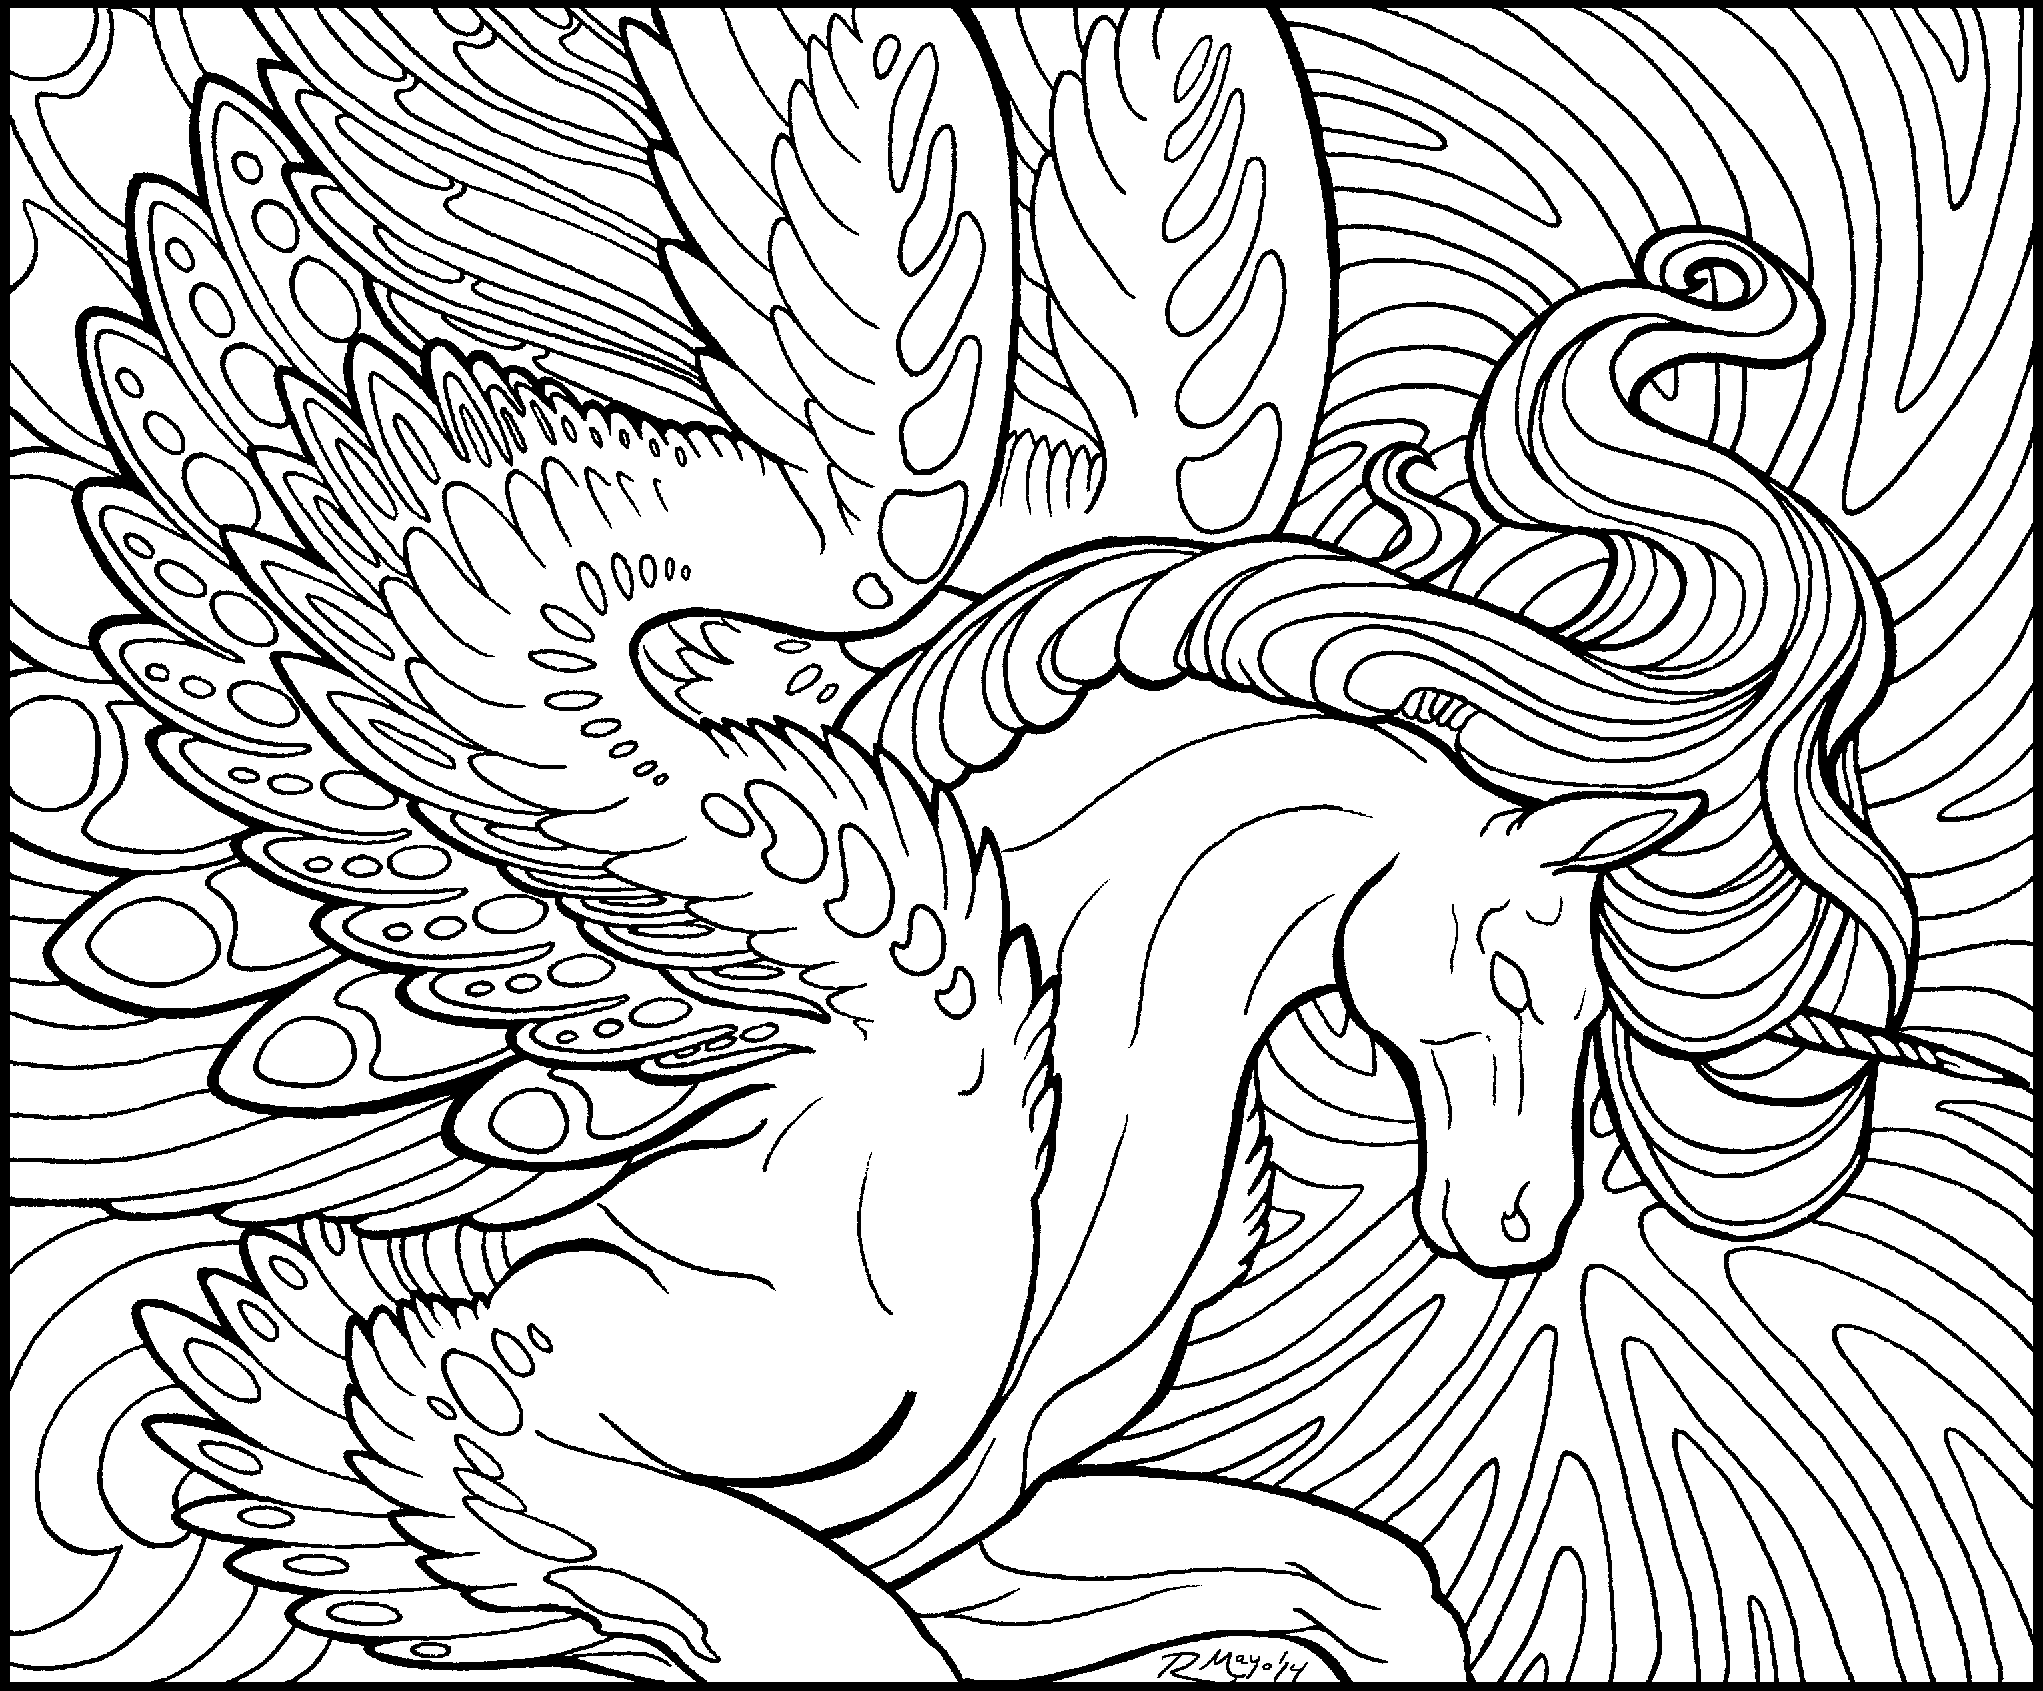 Starlight Pegasus Lineart By Rachaelm5 On Deviantart Unicorn Coloring Pages Coloring